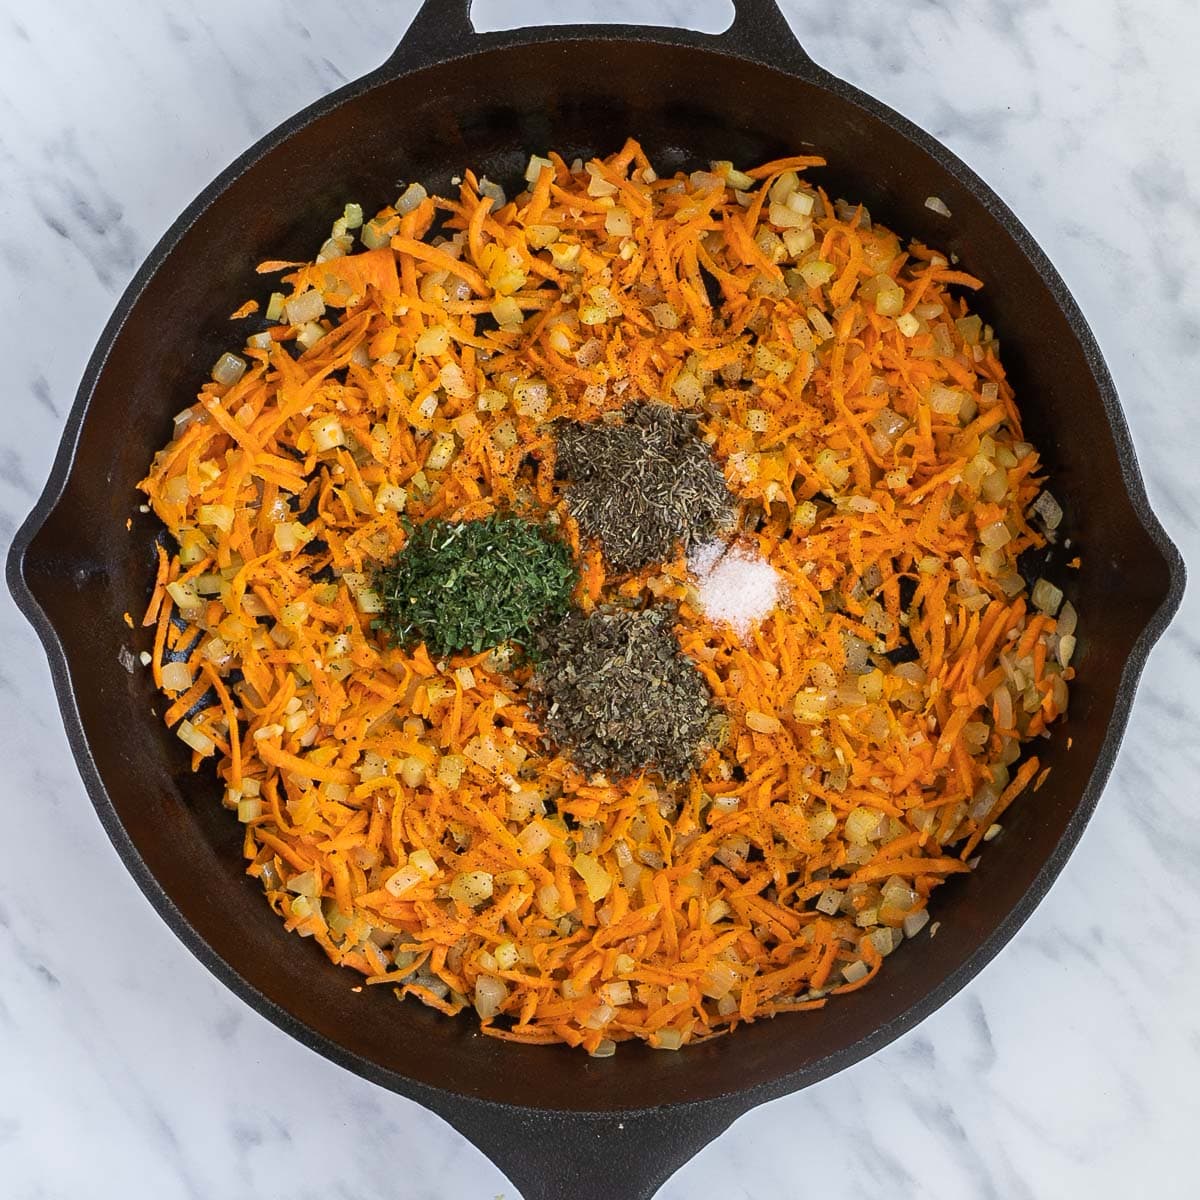 Cast iron skillet with a mix of finely chopped carrots, onion, garlic, celery, and heaps of spices in the middle.